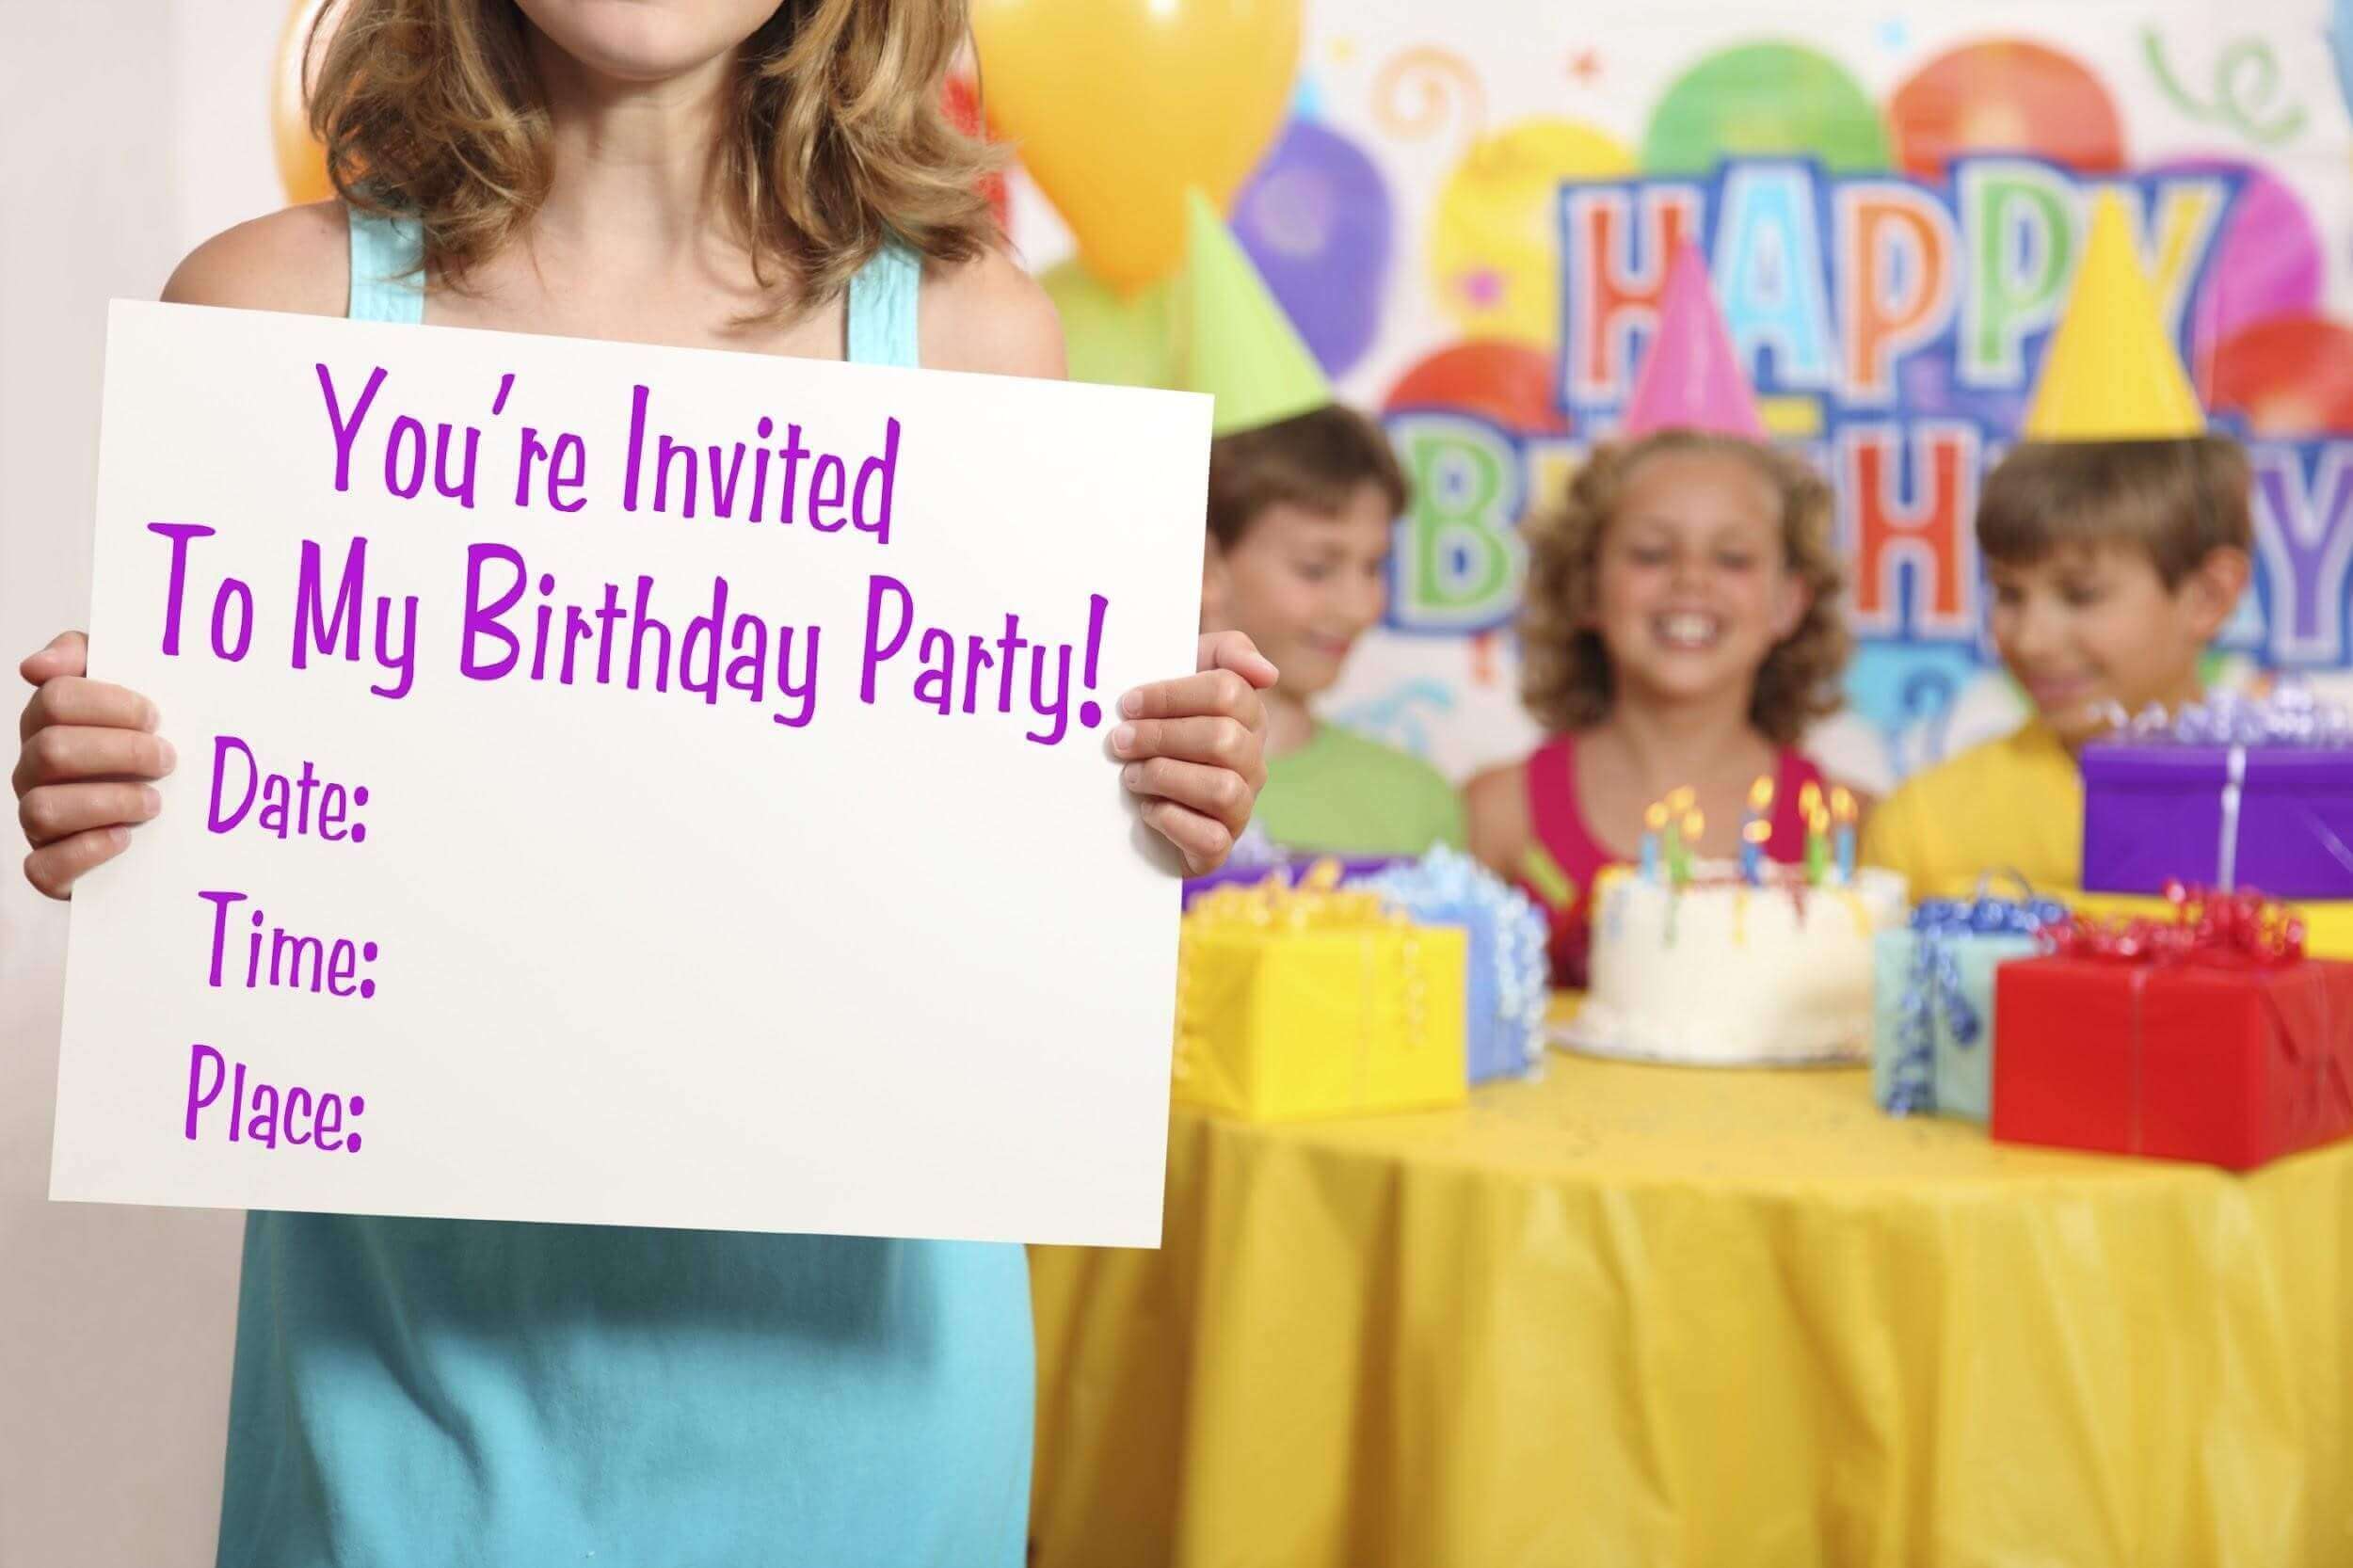 Little Girl Holding Party Invitation